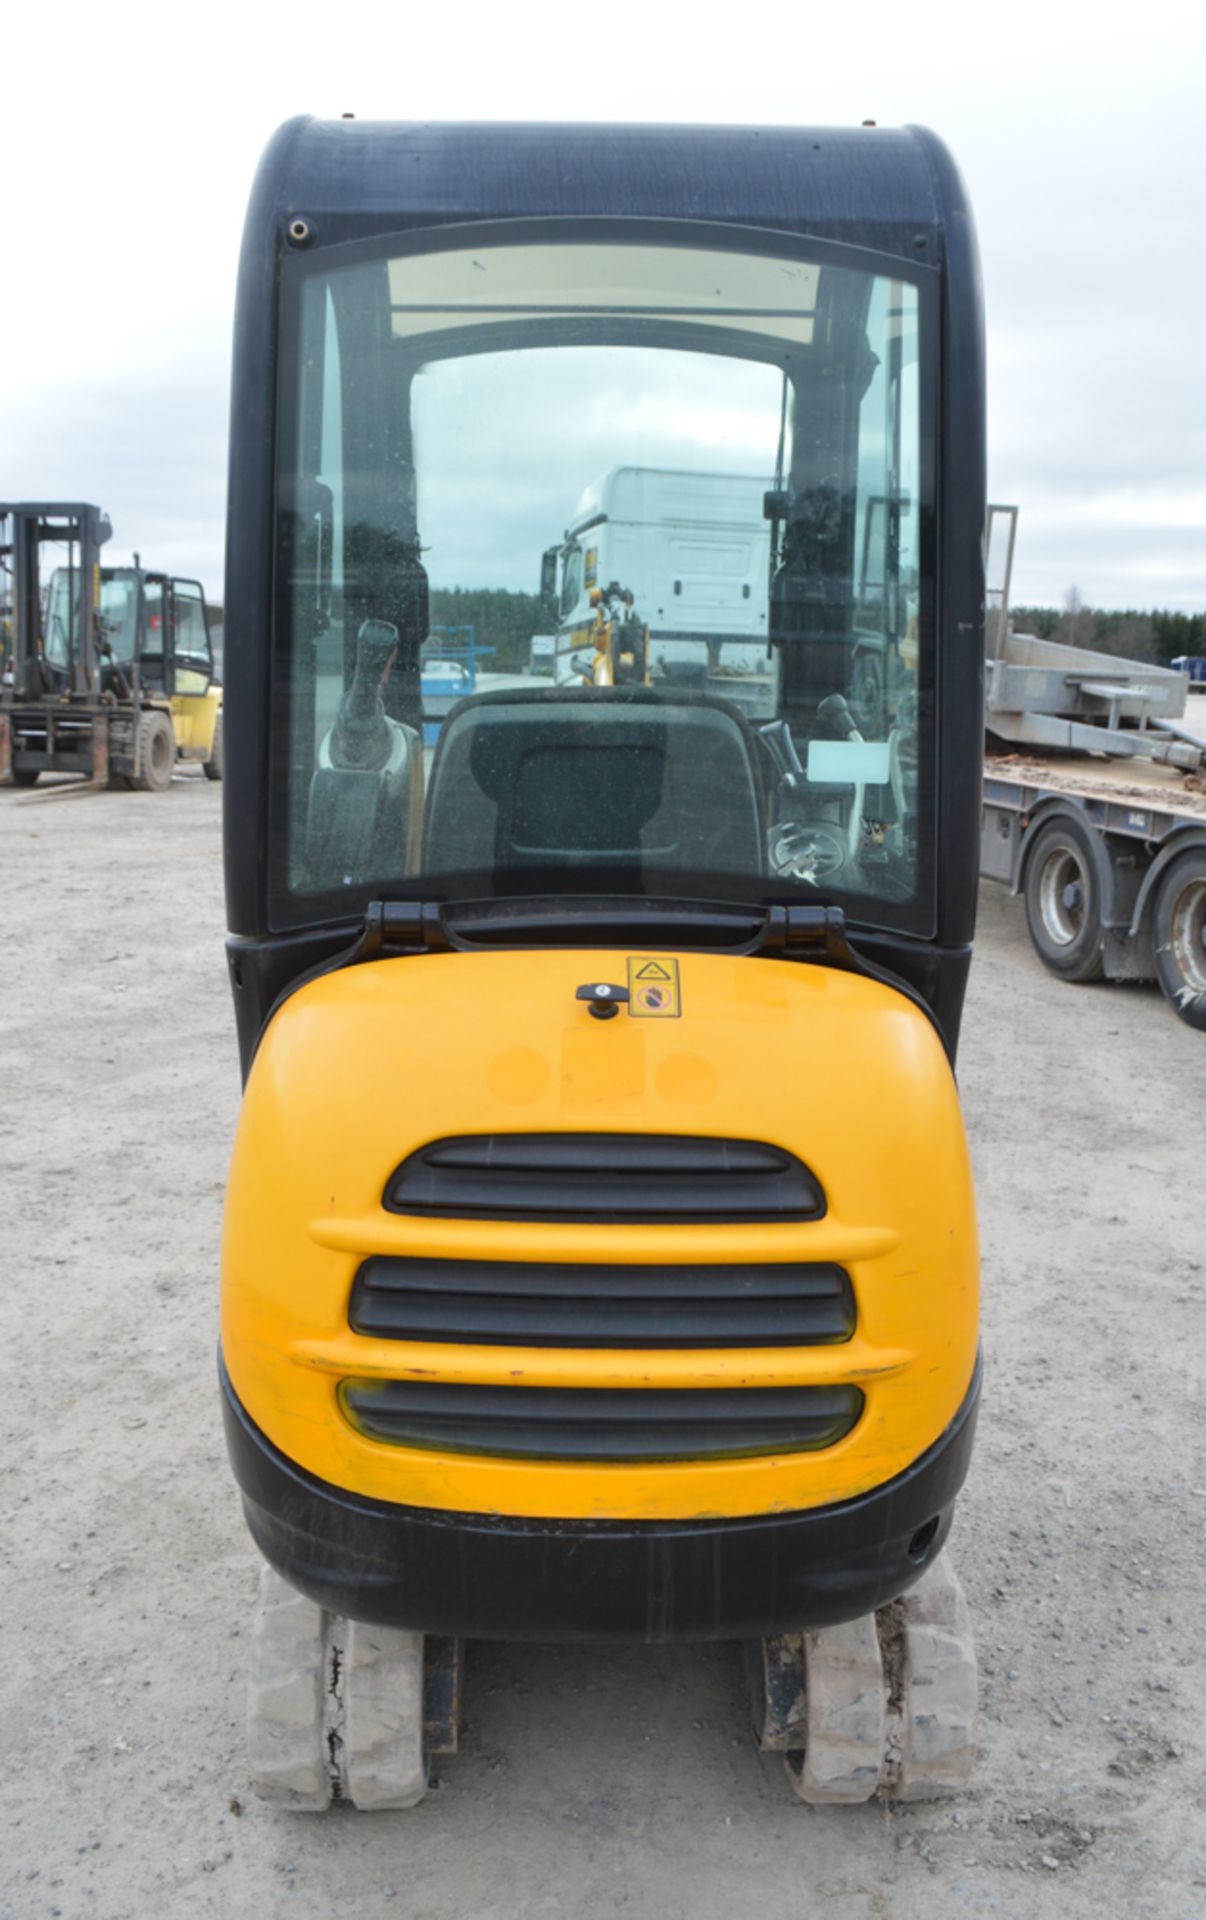 JCB 801.6 1.5 tonne rubber tracked mini excavator Year: 2012 S/N: 1794948 Recorded Hours: 1059 - Image 6 of 11